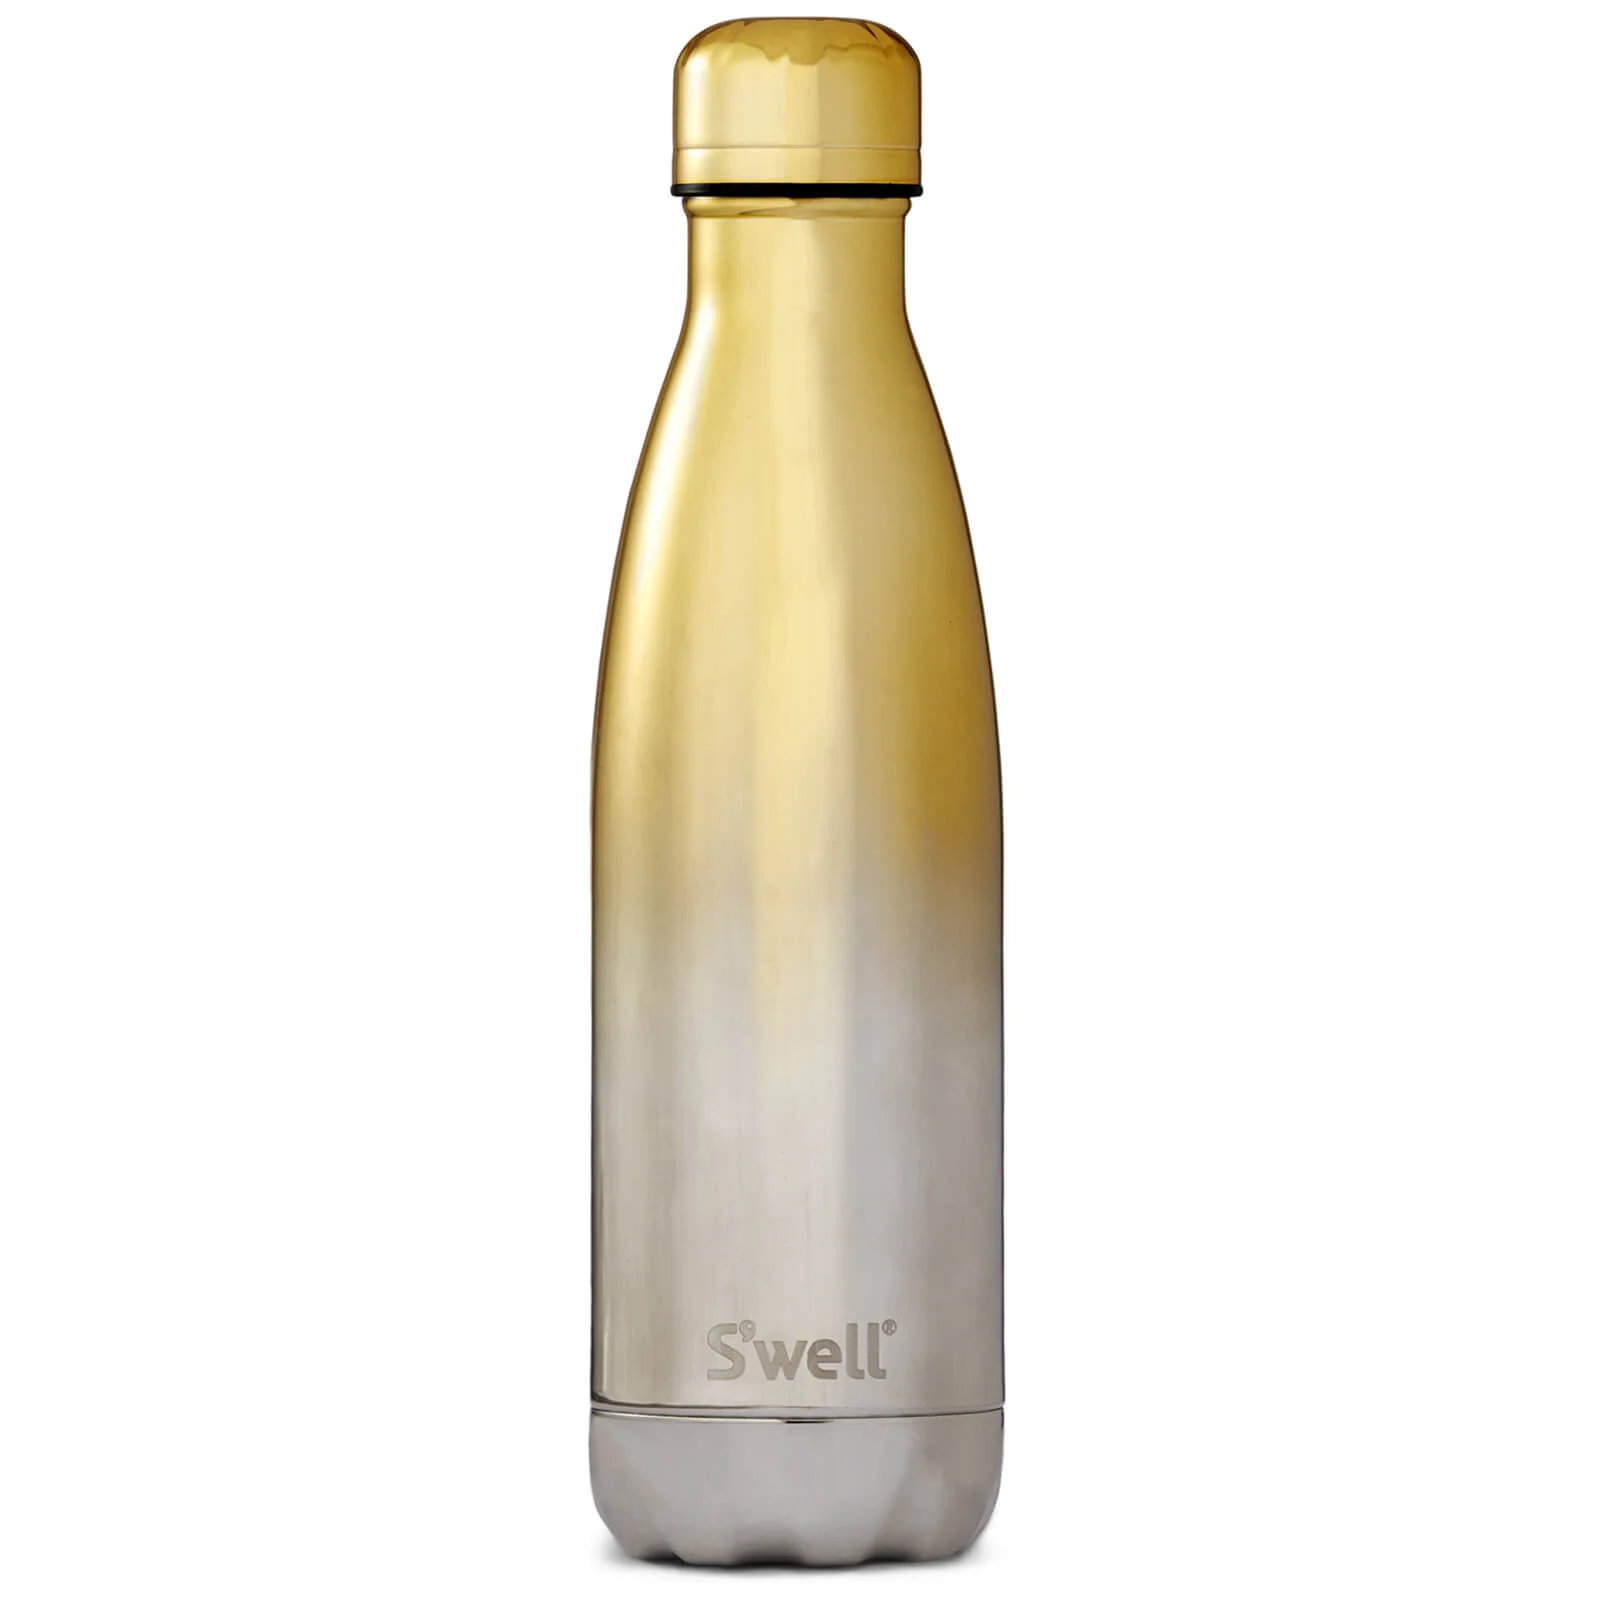 S'well Yellow Gold Ombre Water Bottle 500ml Image 1